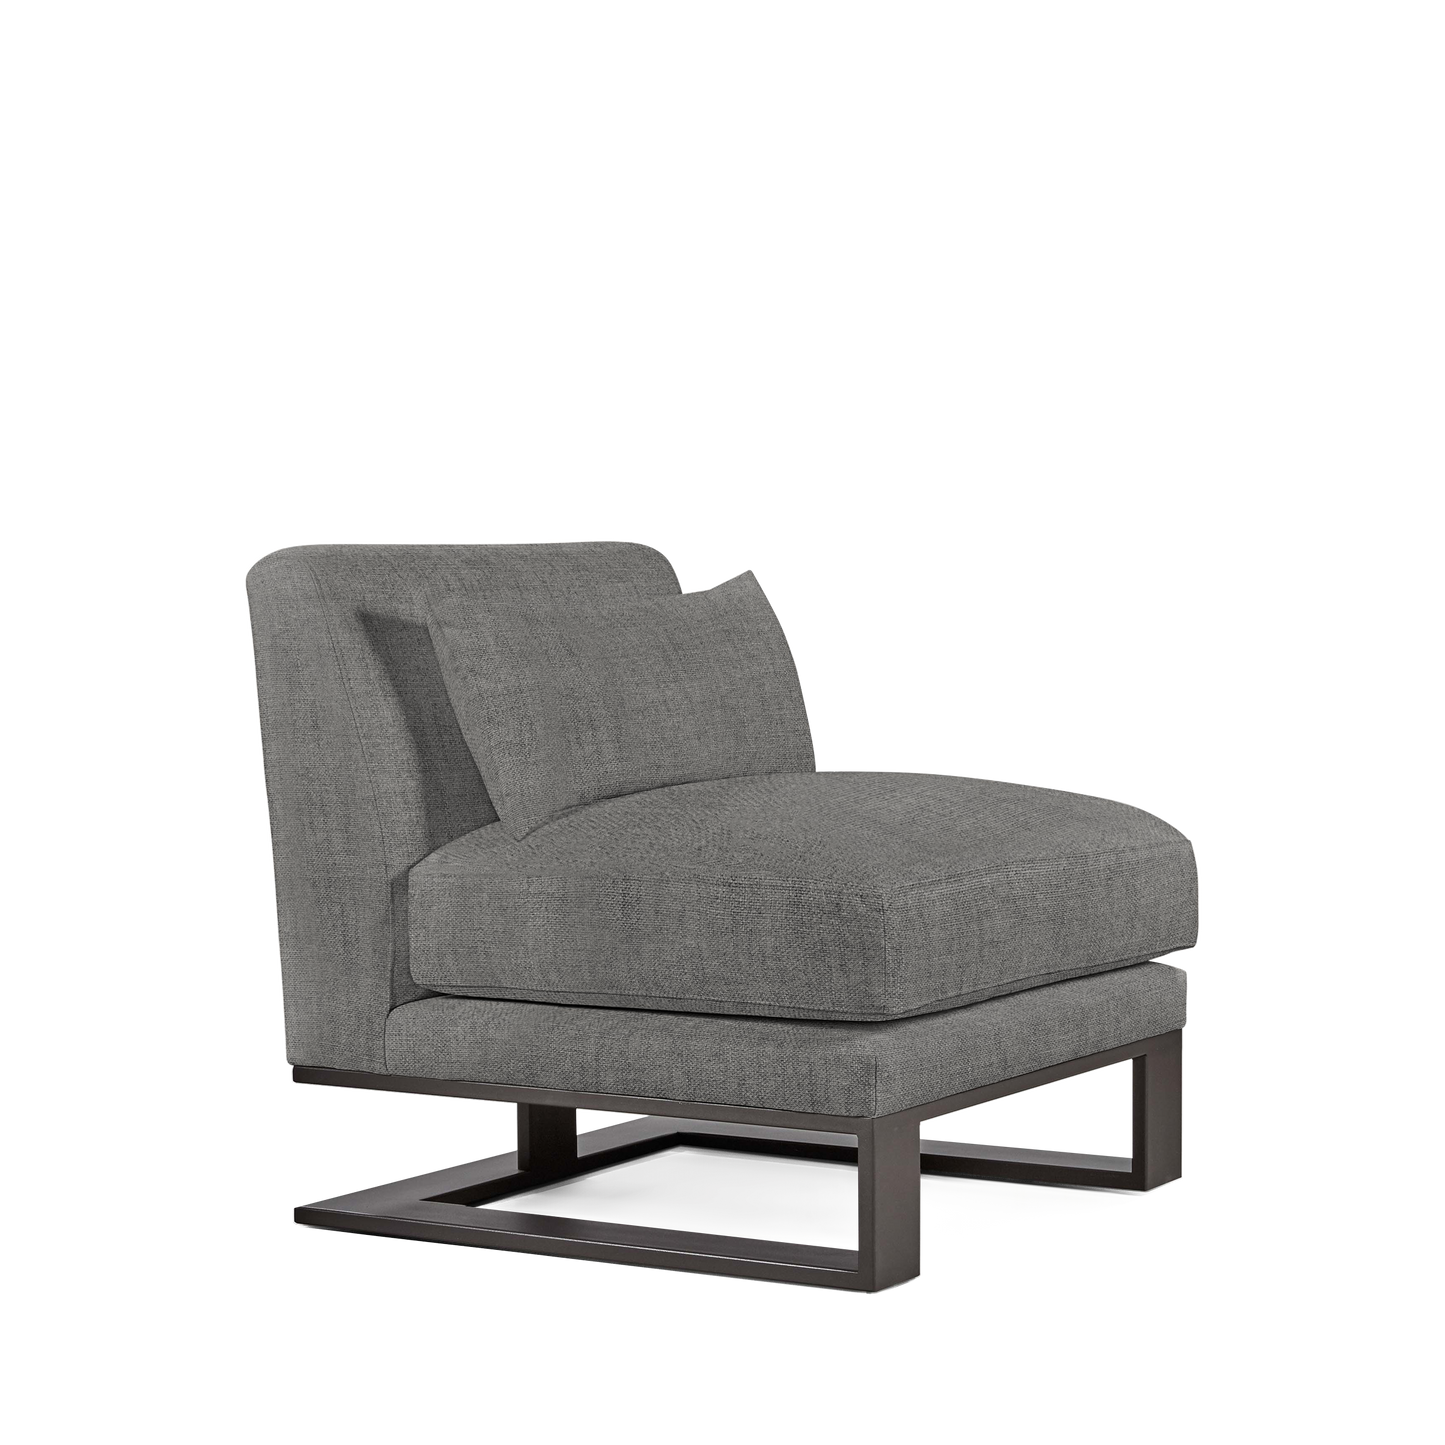 Alpes armchair with dark grey textile and moka colored wood legs 